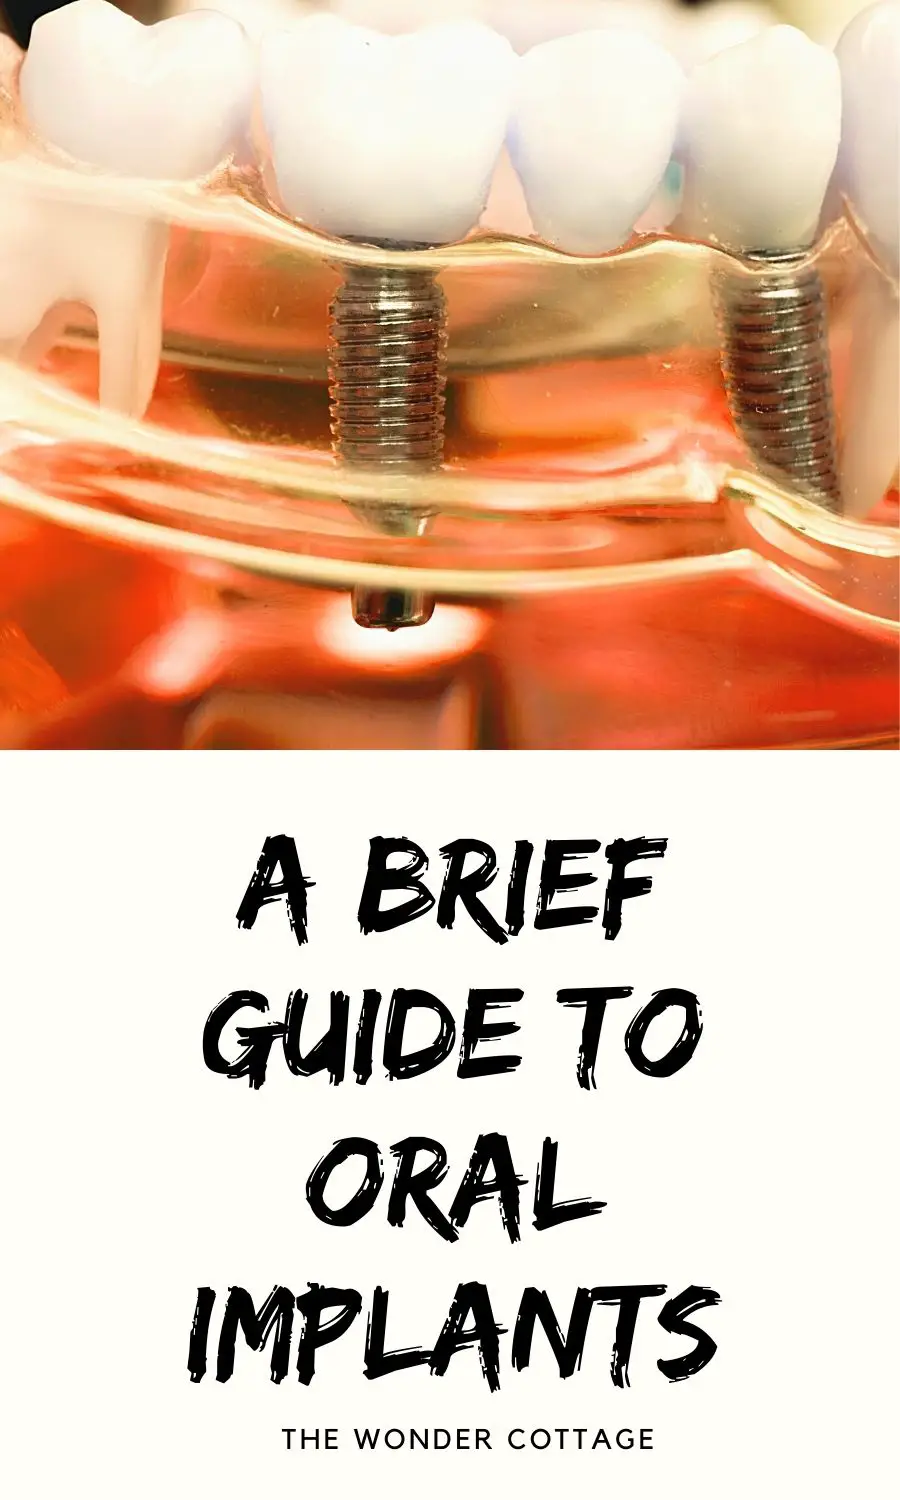 A Brief Guide To Oral Implants